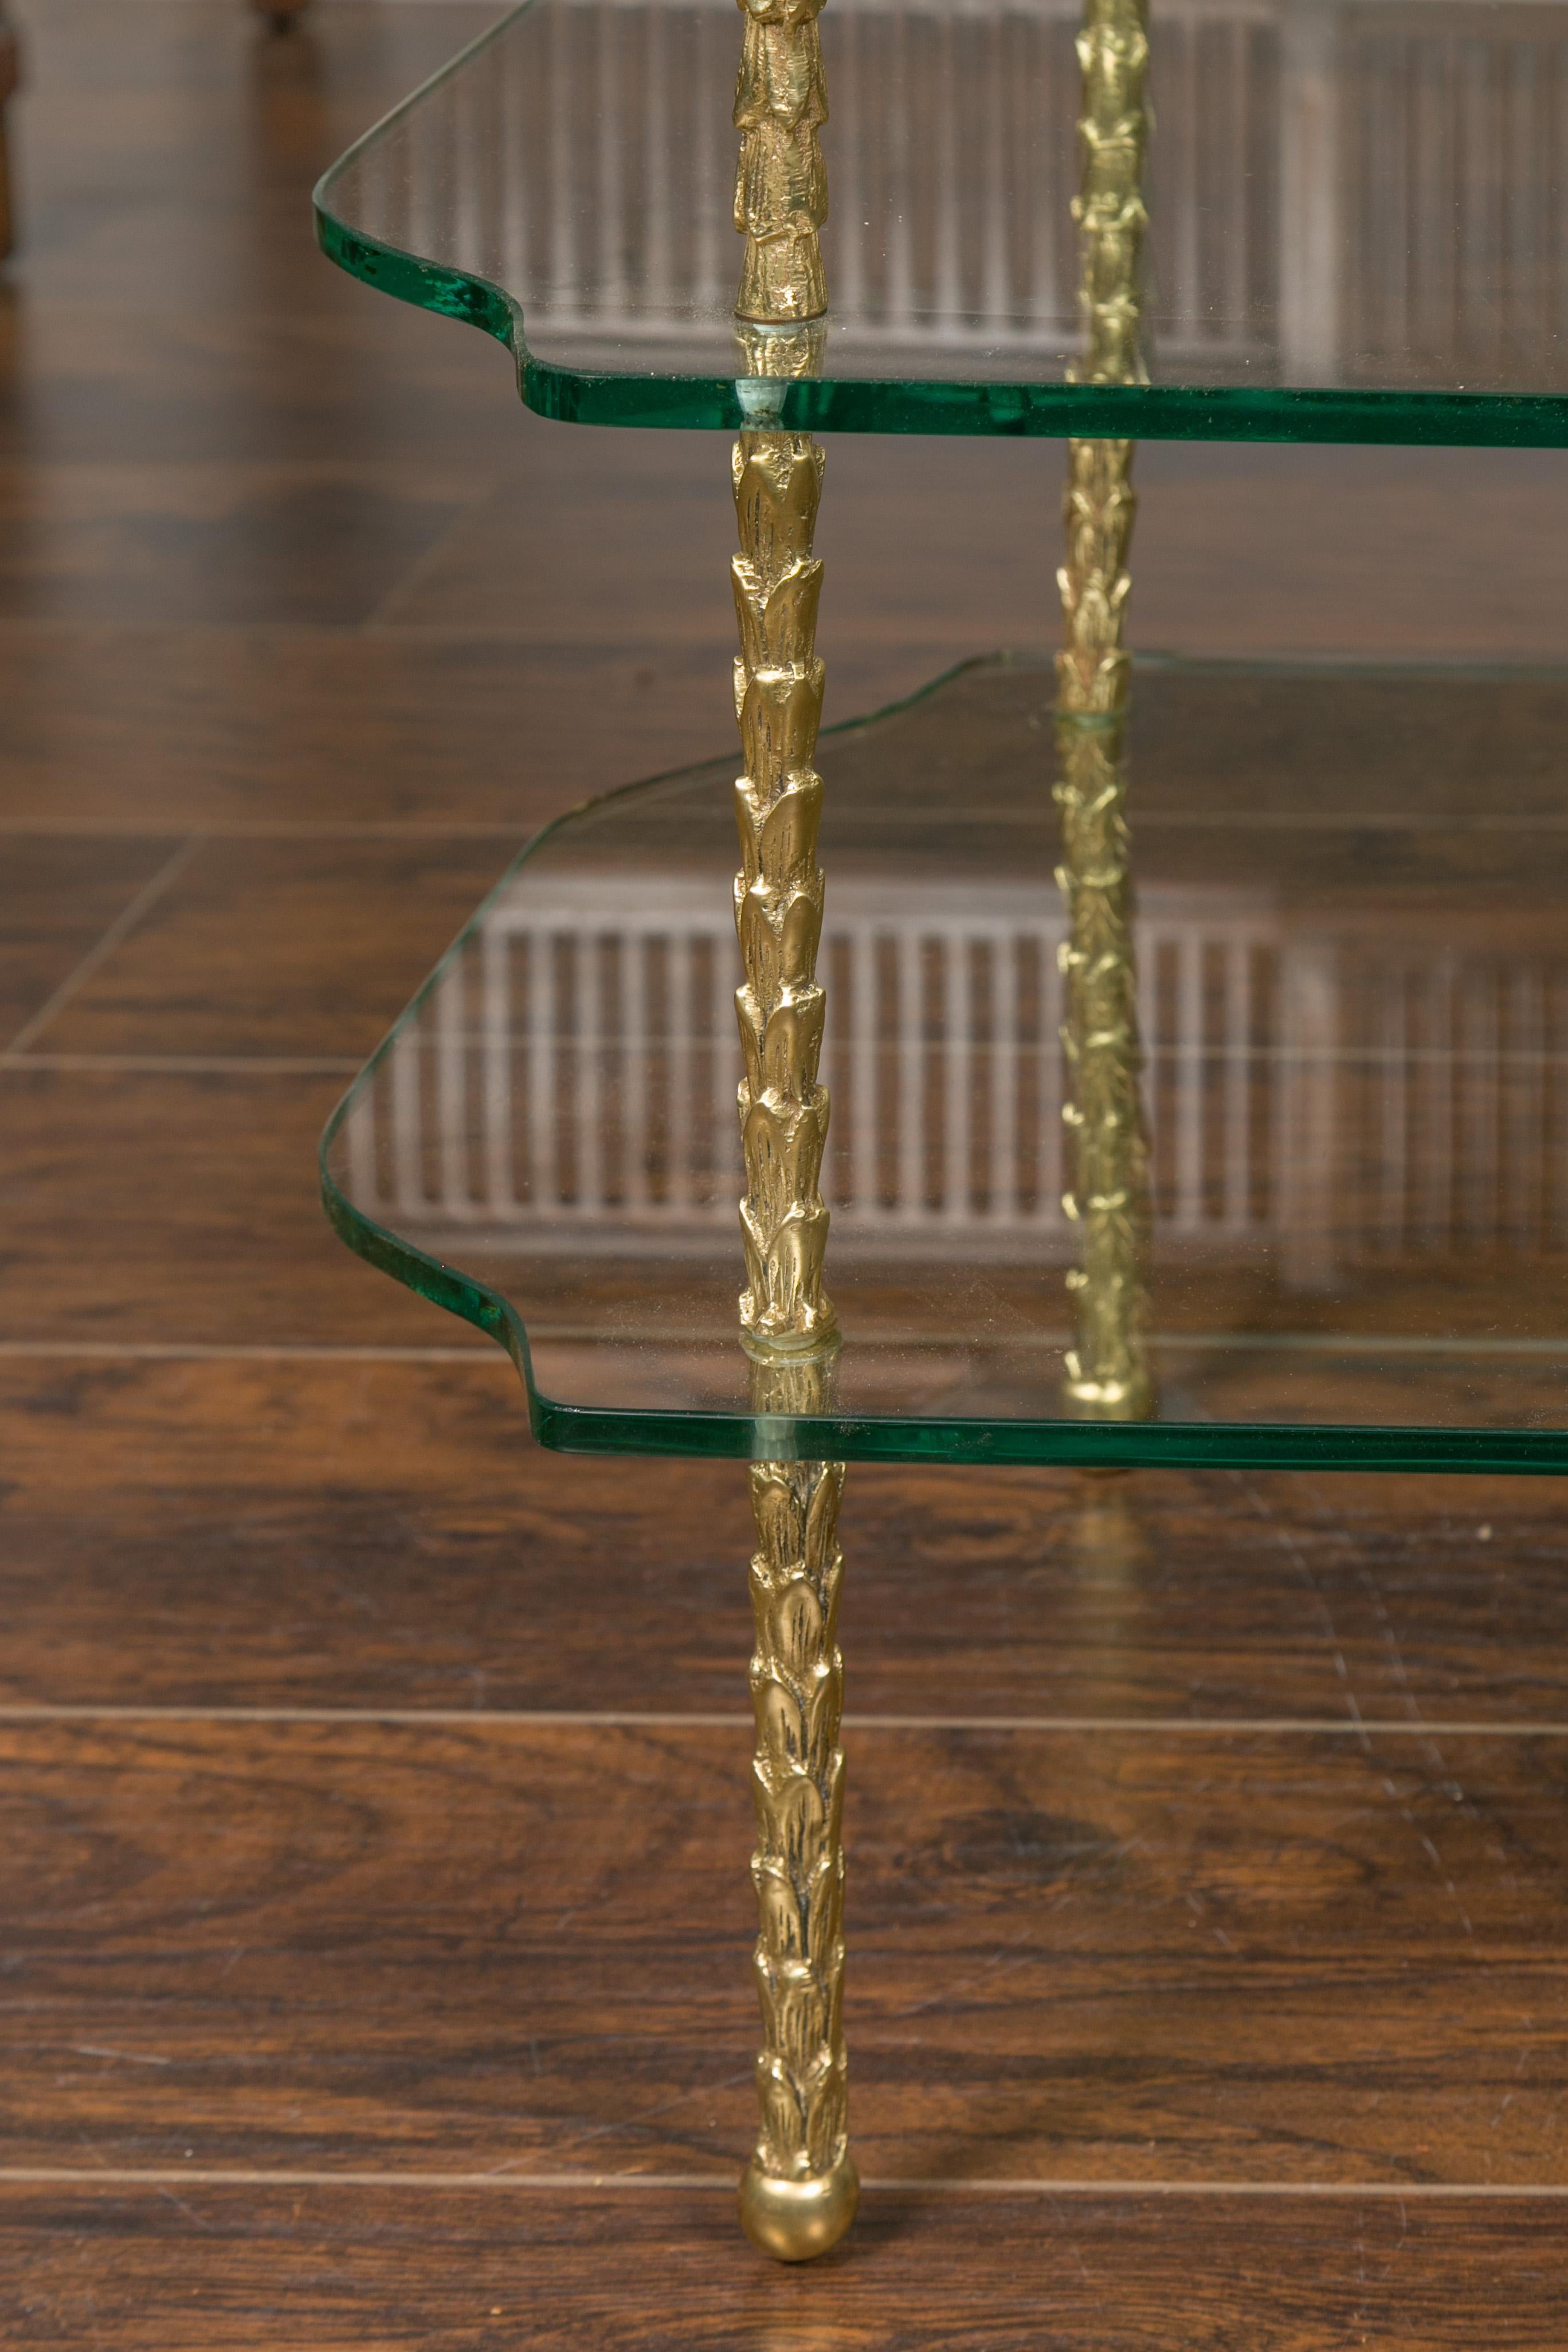 Midcentury Brass Three-Tiered Table with Glass Shelves and Foliage Motifs For Sale 1